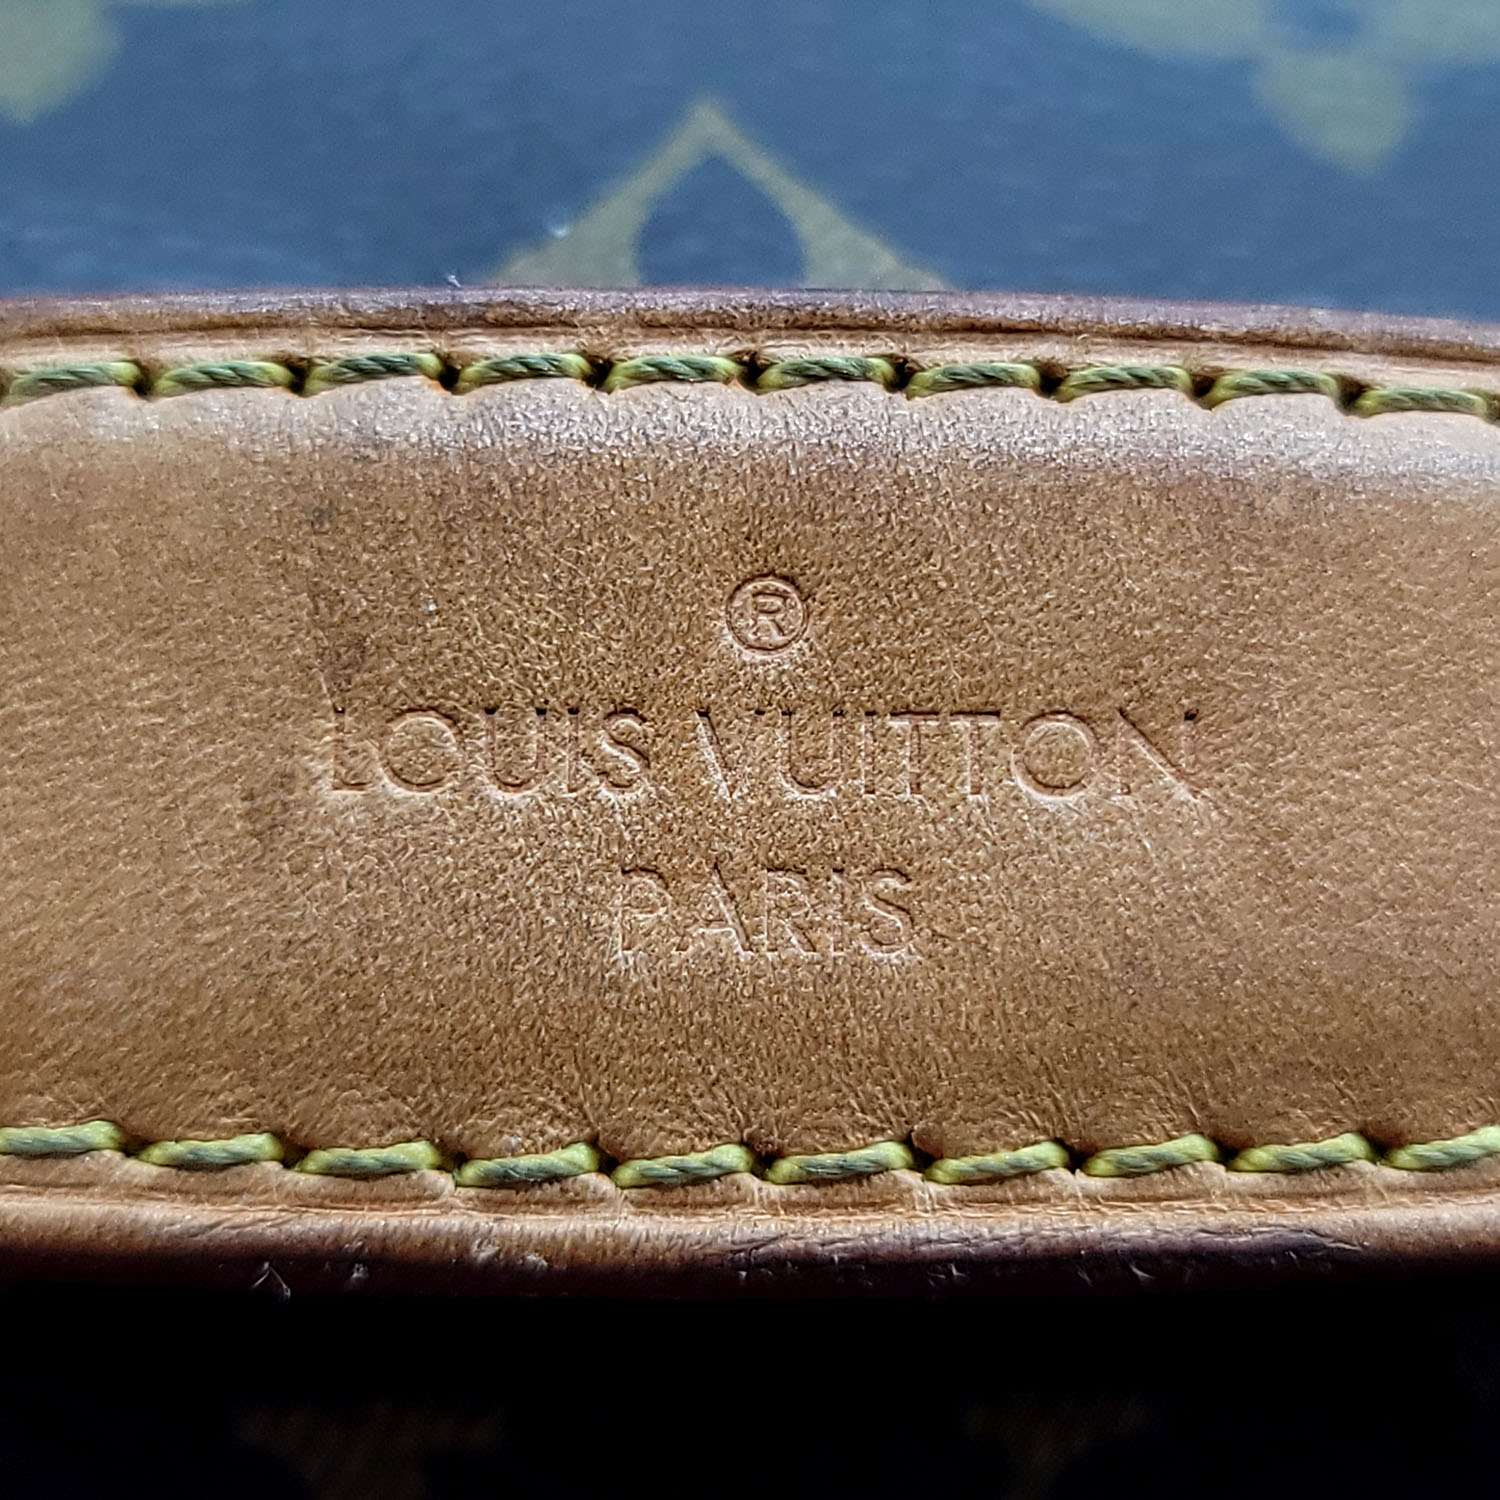 😱😱TAKE A LOOK AT THE LOUIS VUITTON HIGH RISE BUMBAG